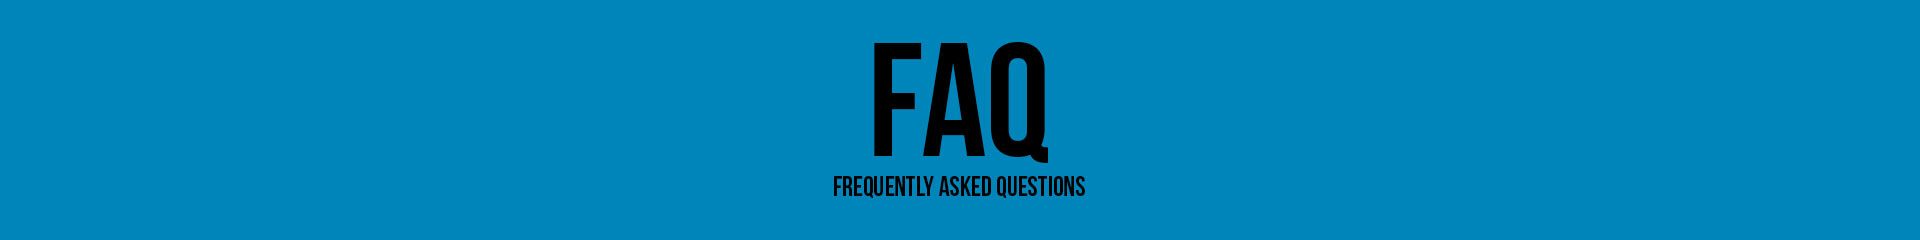 VPN Questions and Answers